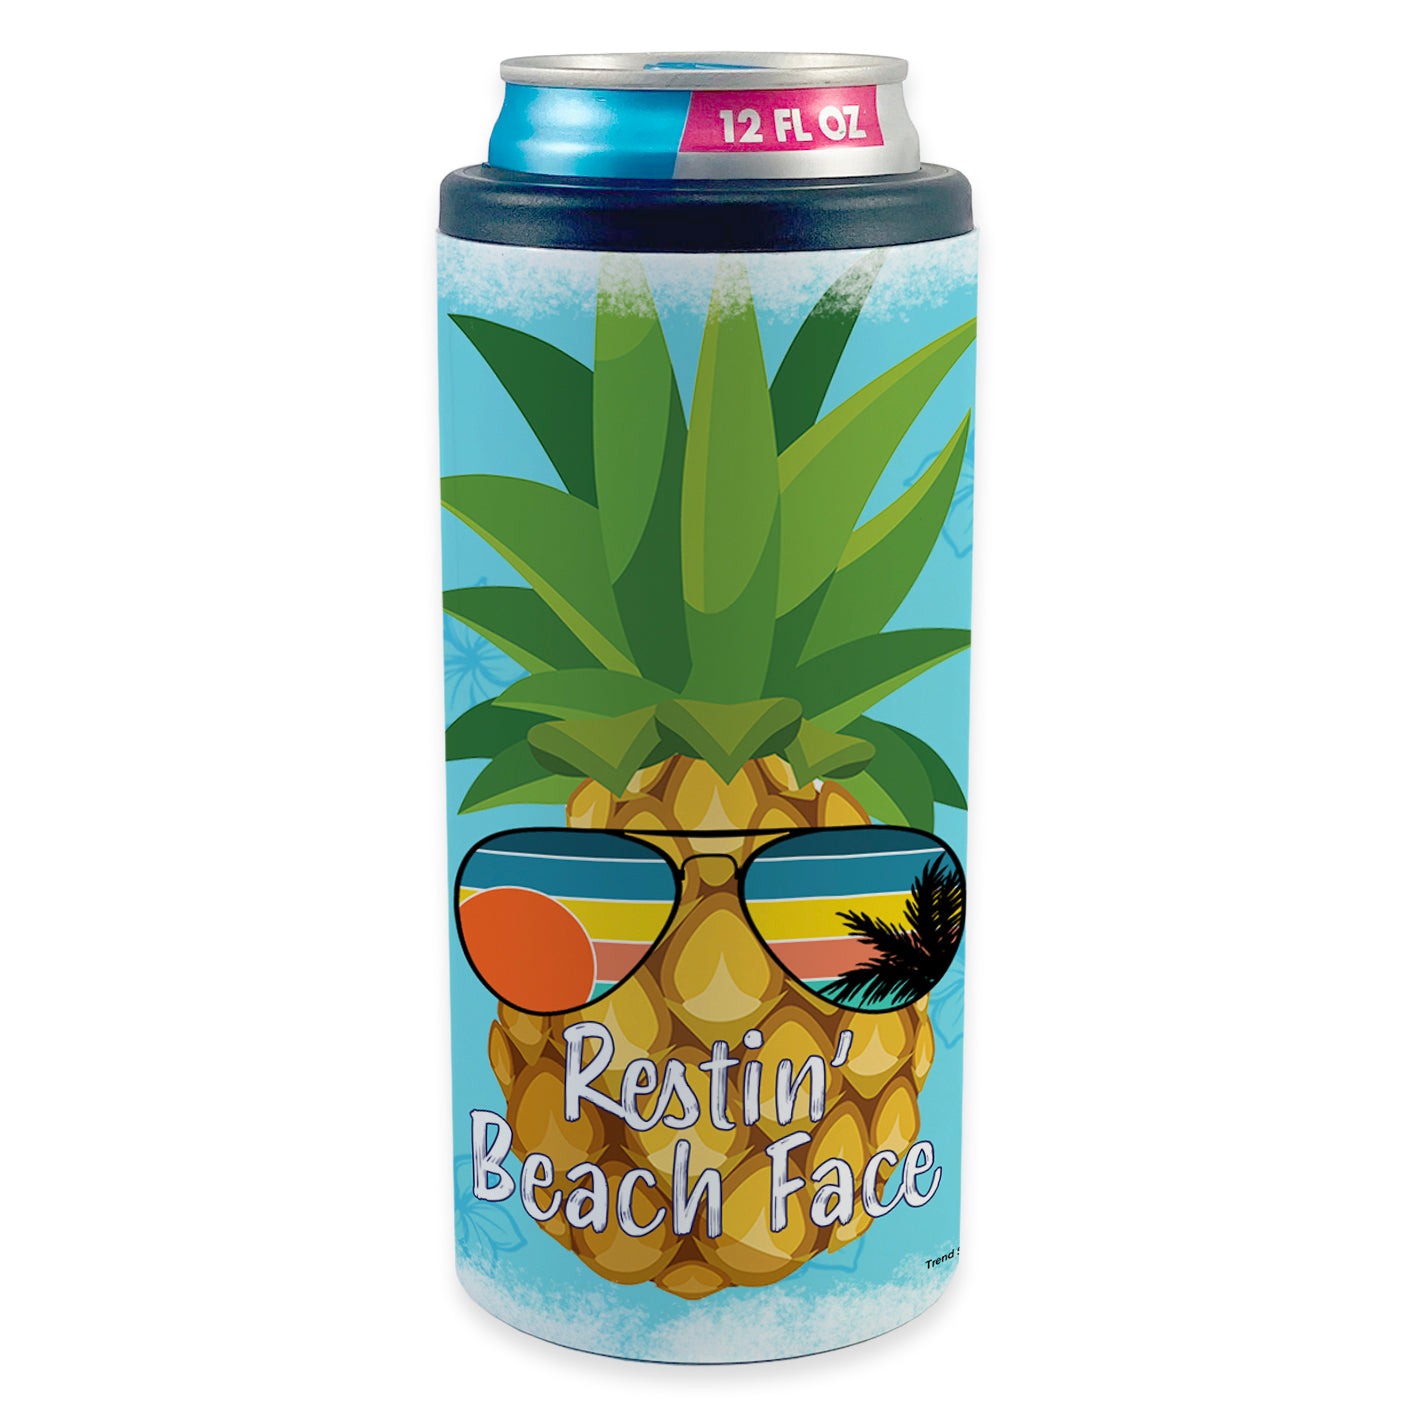 Vacation Collection (Restin Beach Face) 12 Oz Slim Can Cooler